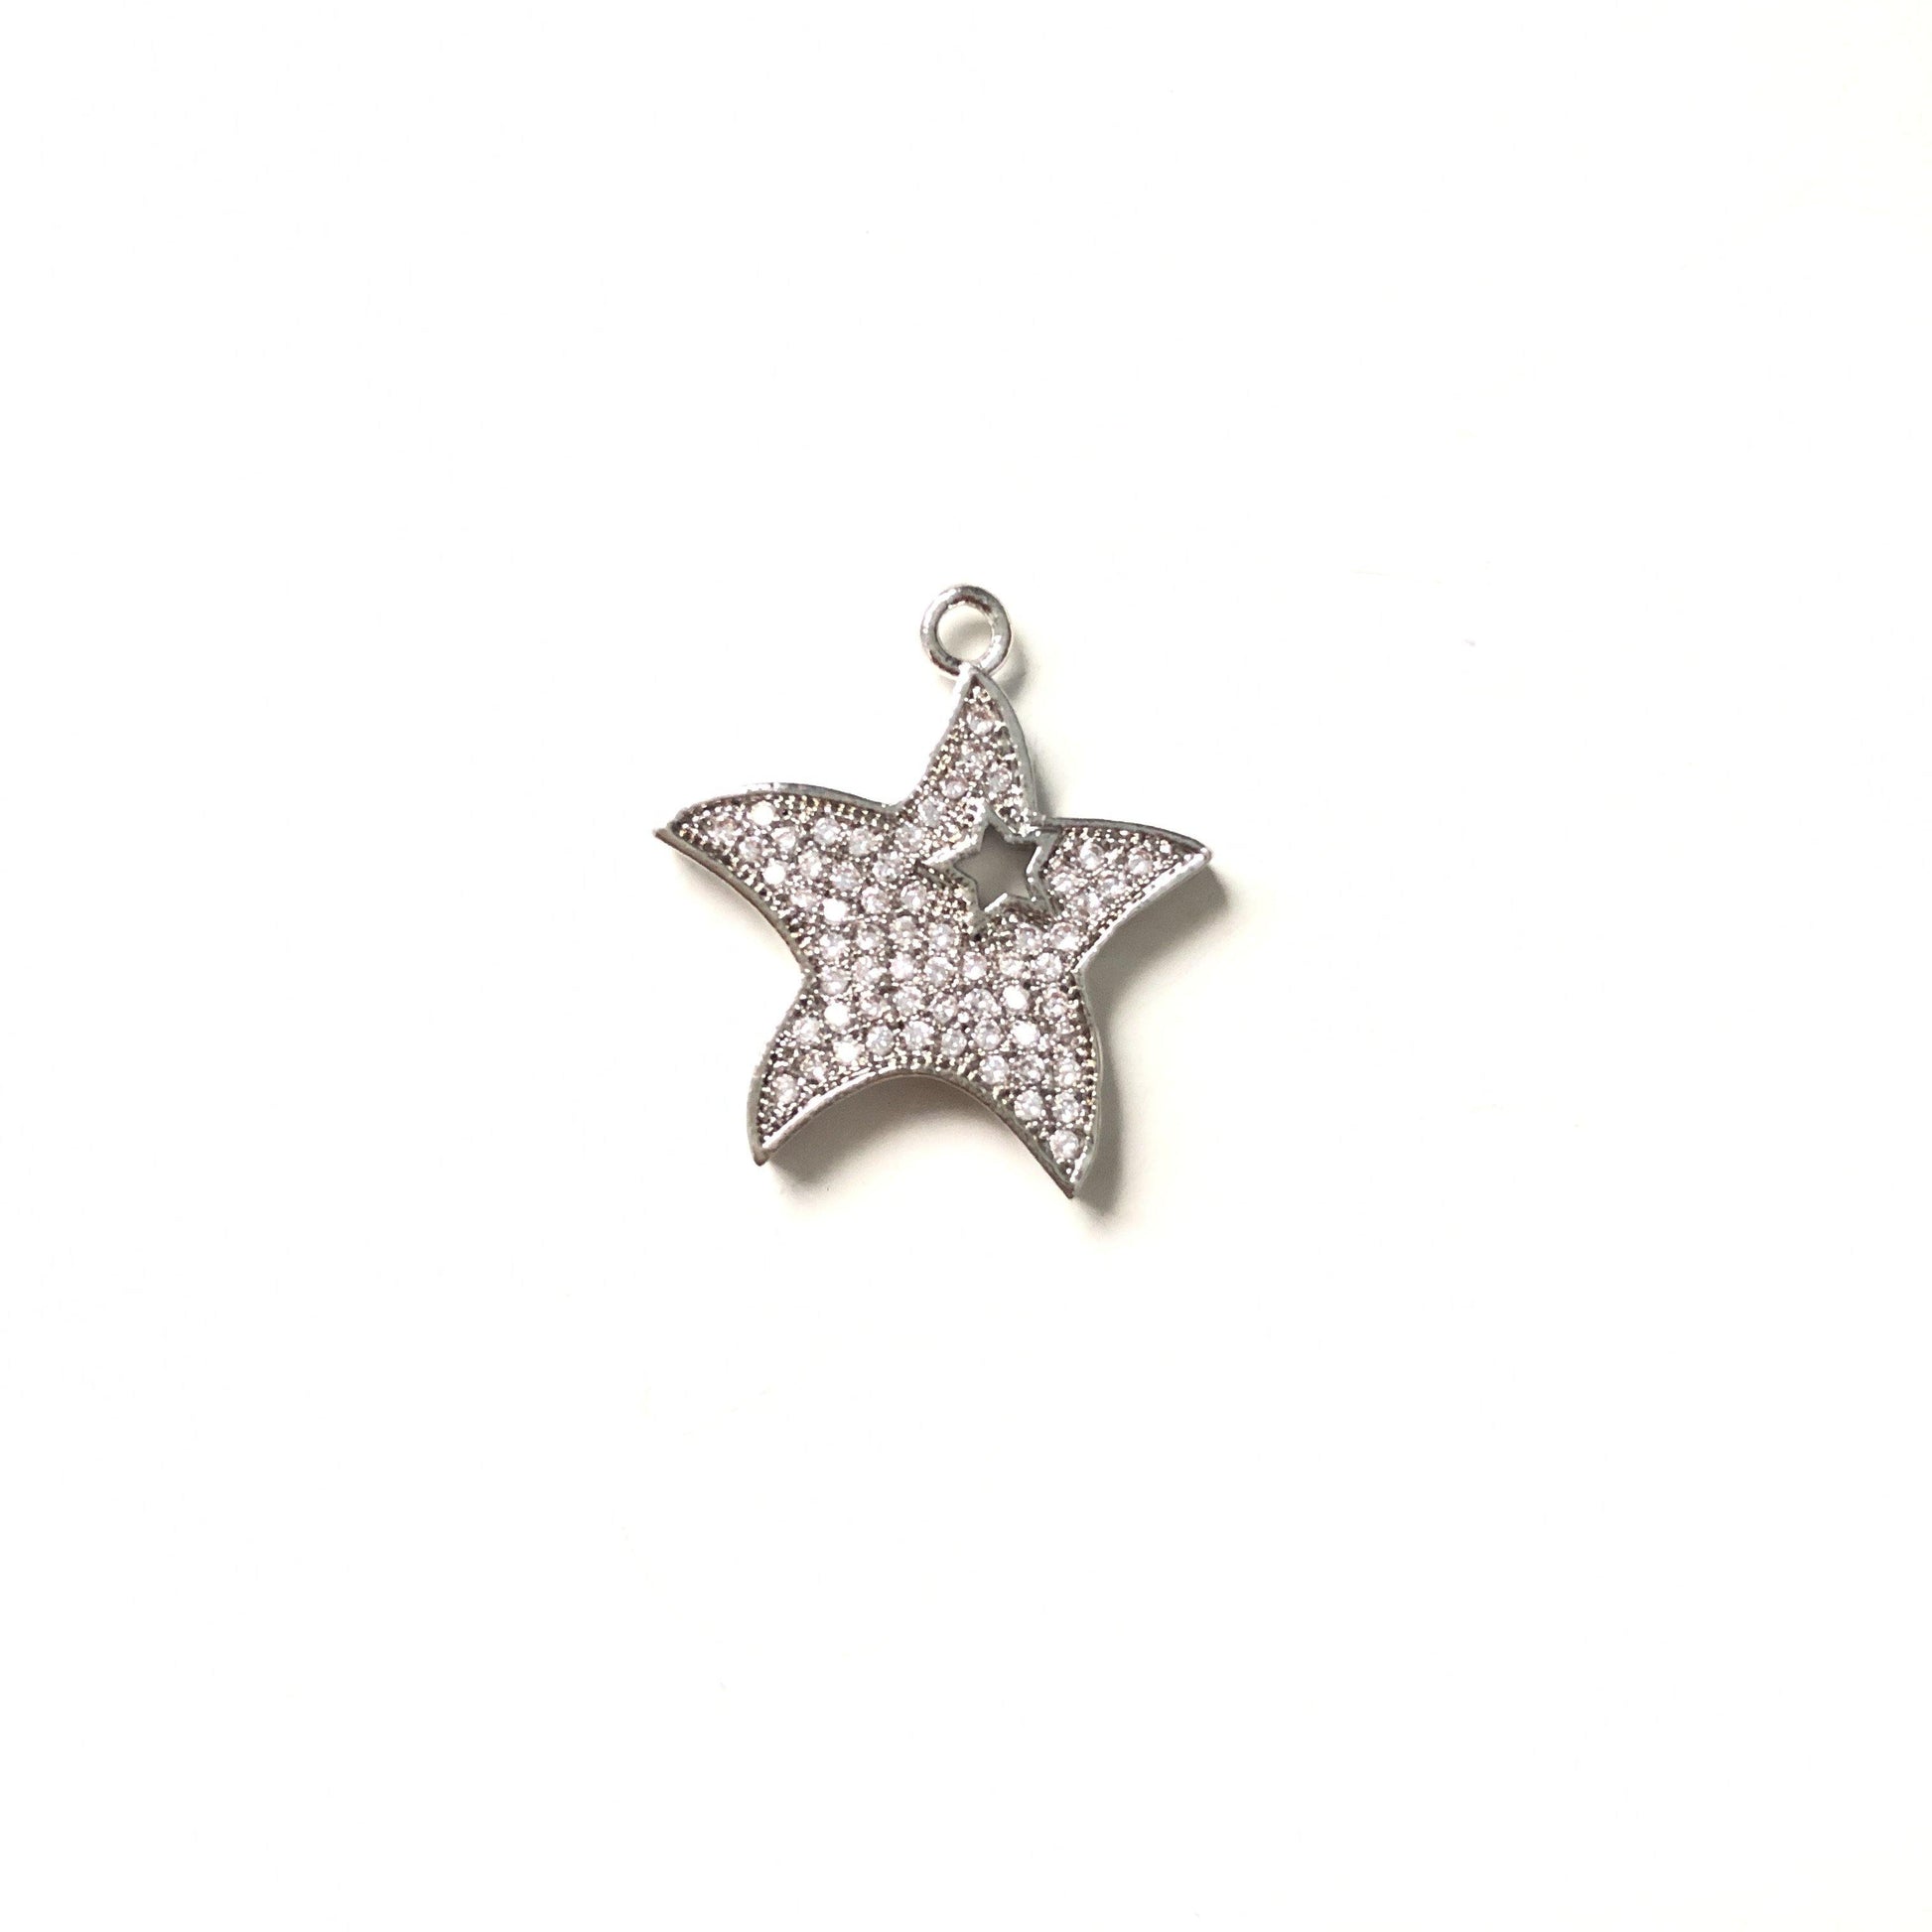 10pcs/lot 21*12mm Clear CZ Paved Star Charms Silver CZ Paved Charms Sun Moon Stars Charms Beads Beyond